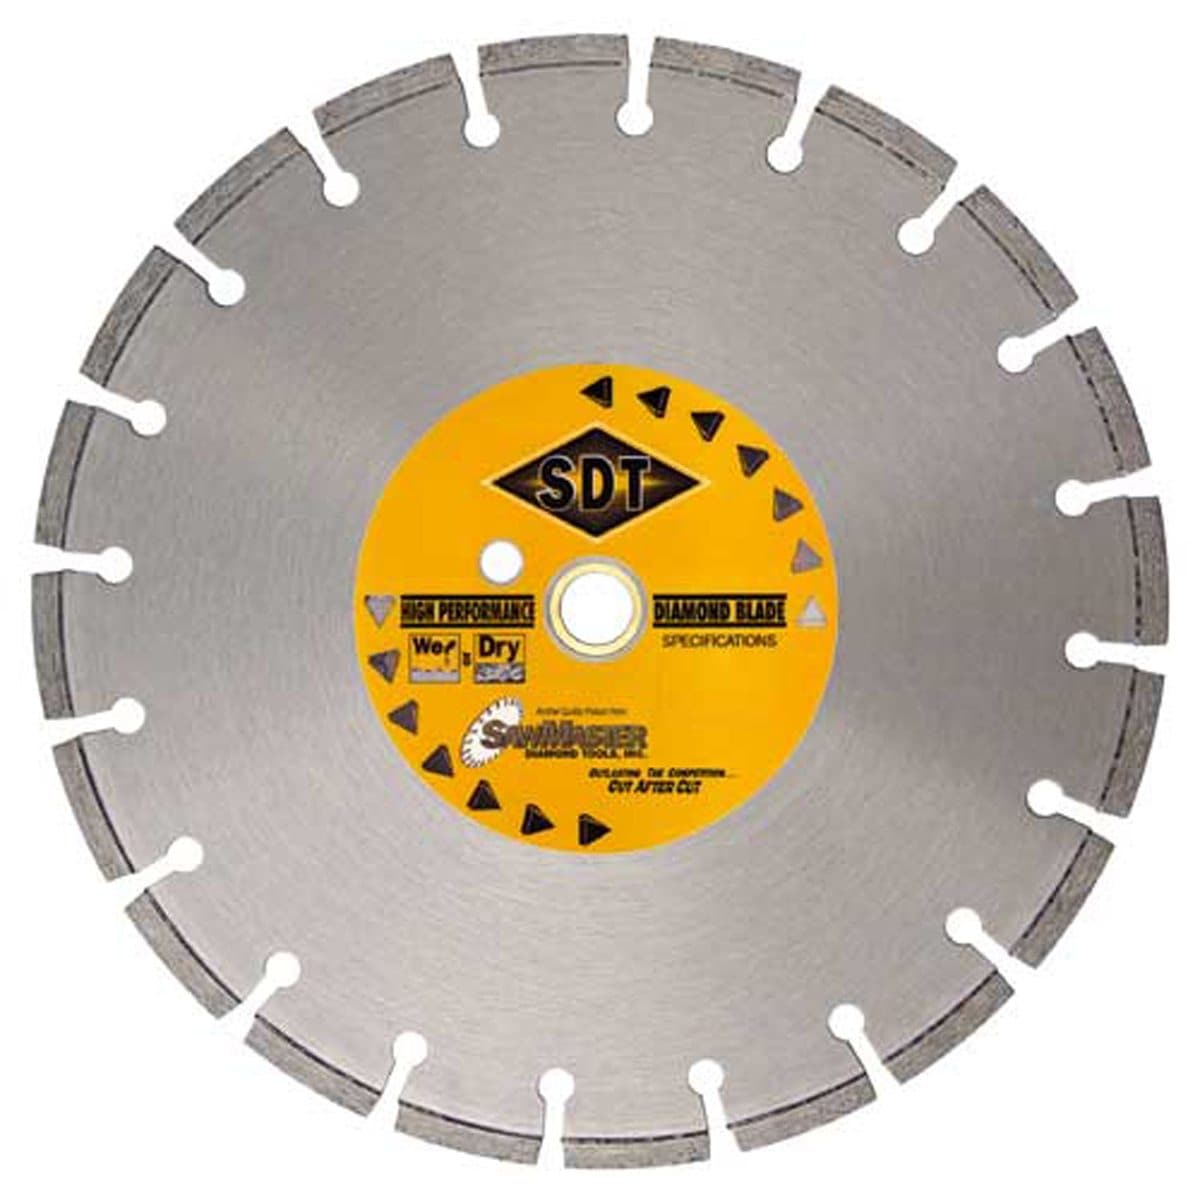 SawMaster Cured Concrete Wet Cutting Blades For Walk Behind Saw - SawMaster